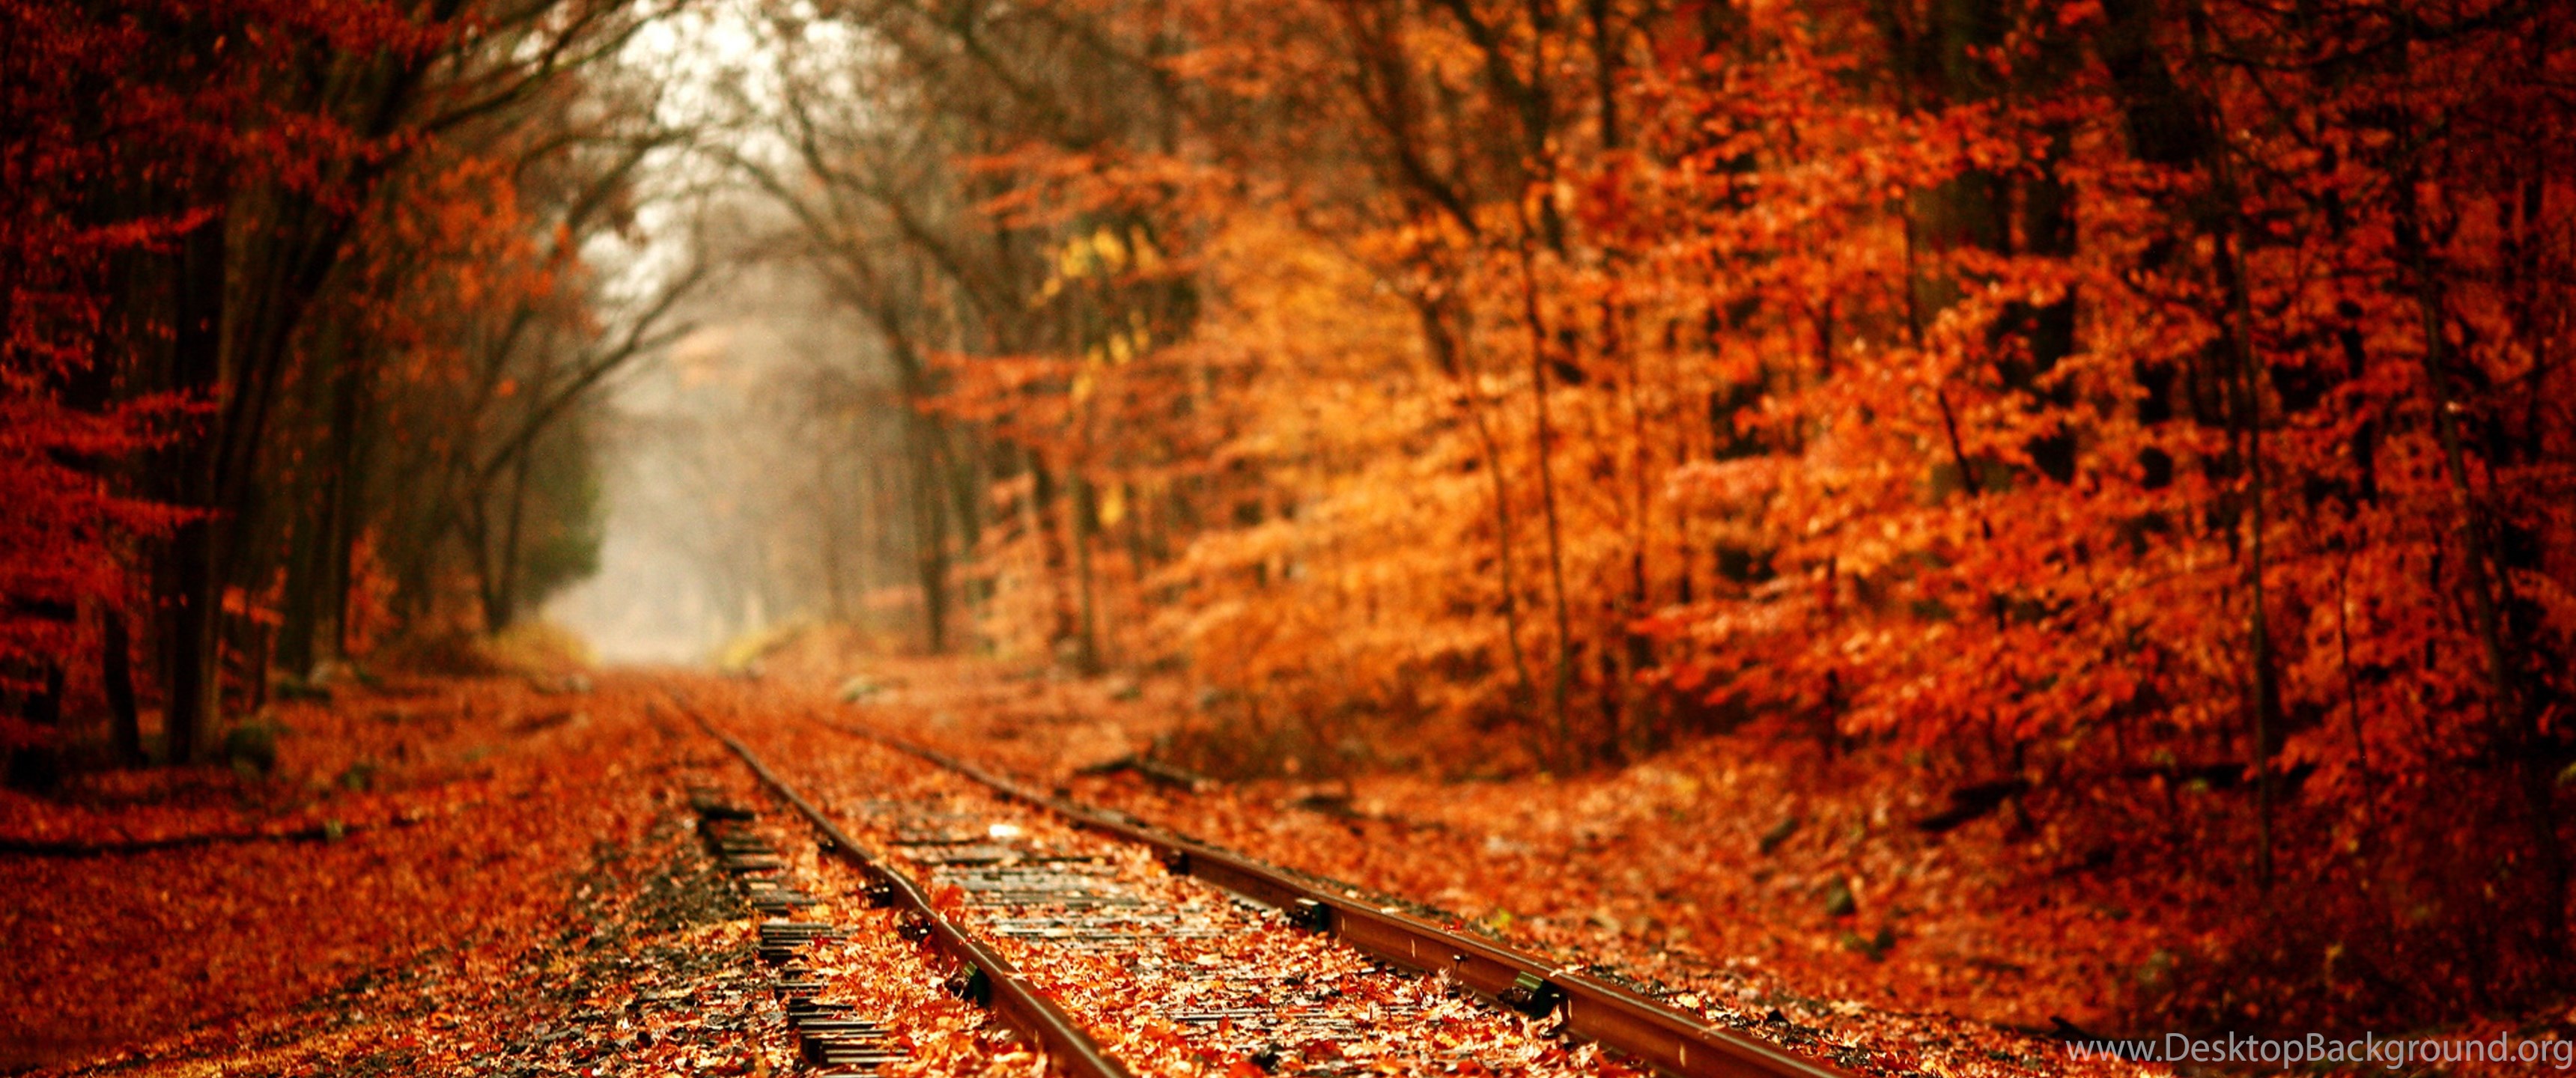 Railroad Full With Autumn Leaves HD Wallpaper Desktop Background